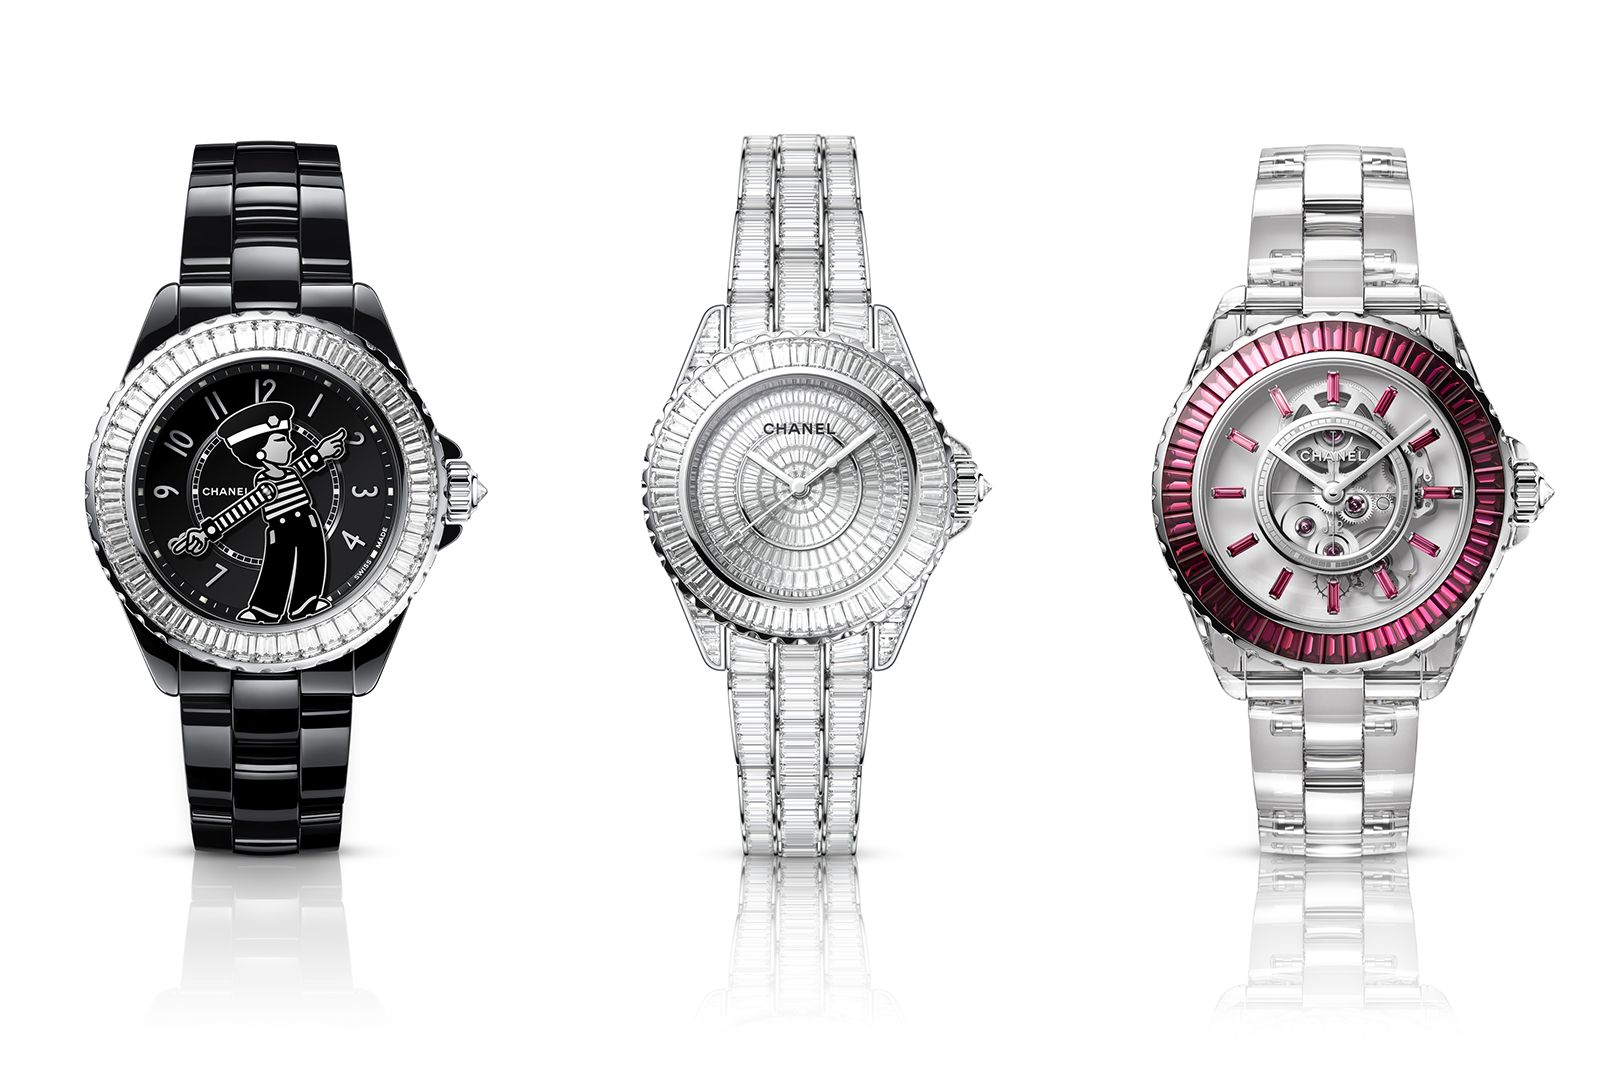 Luxe Time: Fashion Focused Watches with Style and Substance